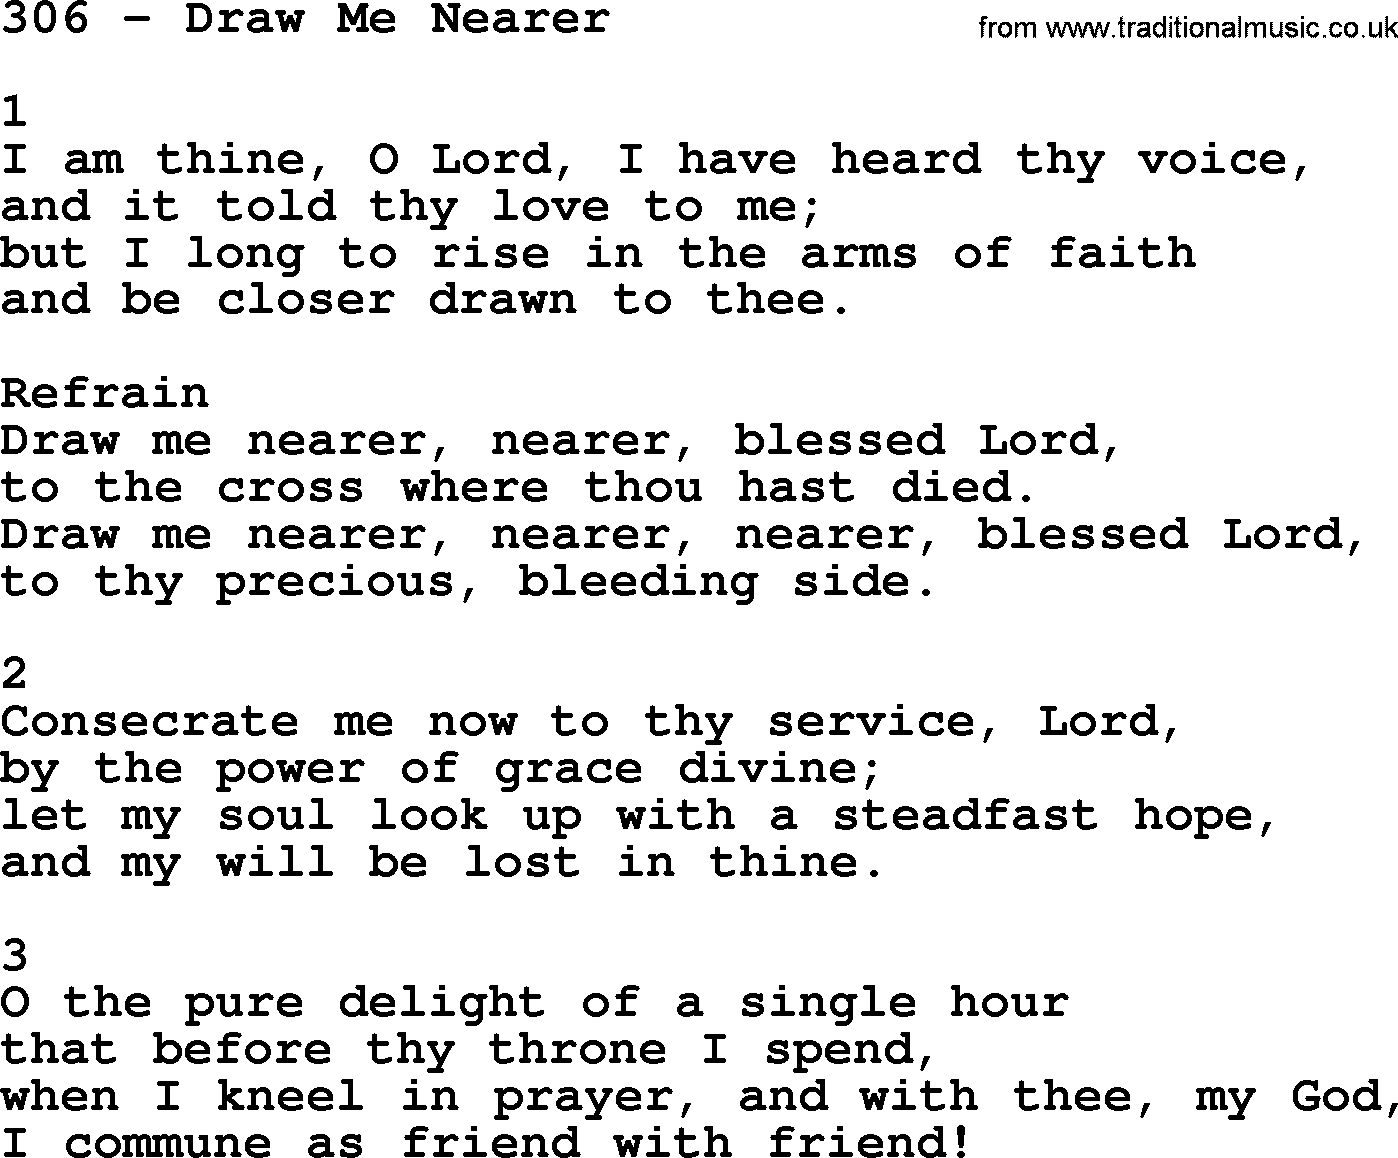 Complete Adventis Hymnal, title: 306-Draw Me Nearer, with lyrics, midi, mp3, powerpoints(PPT) and PDF,